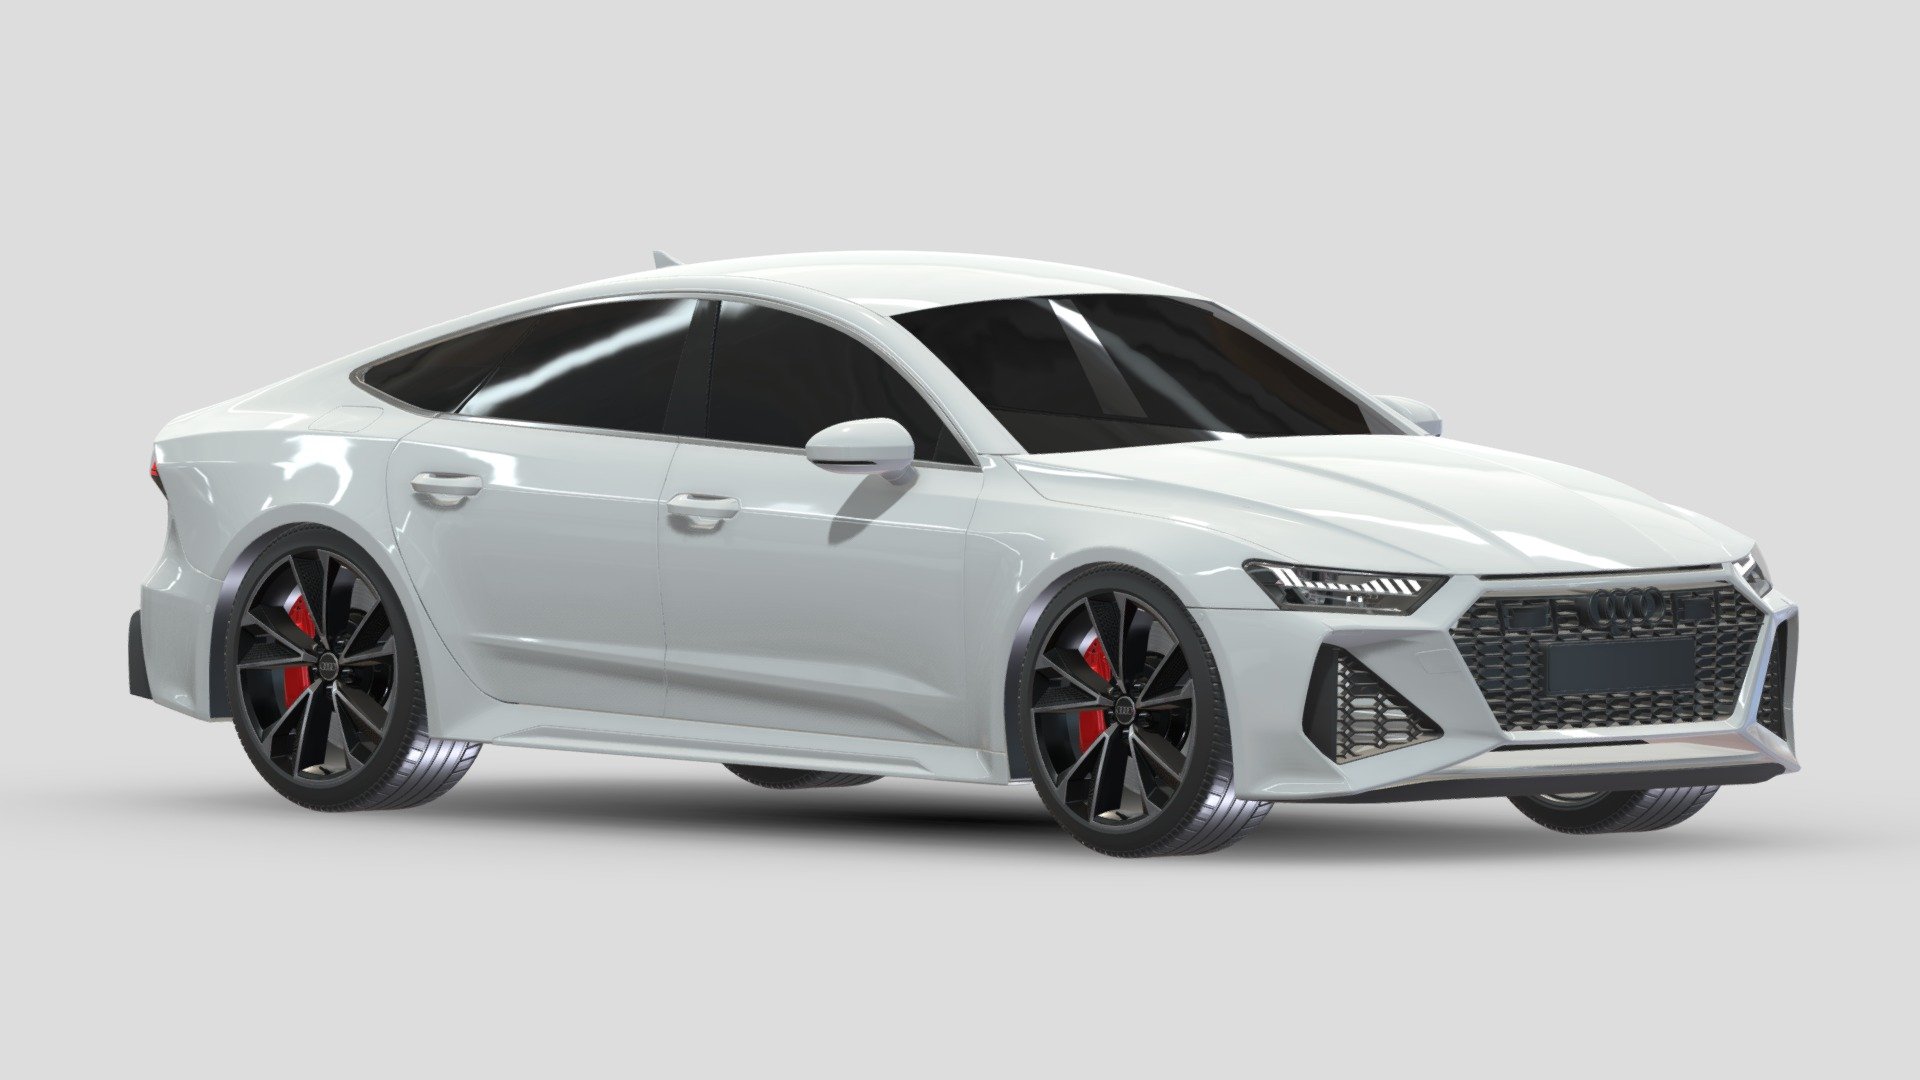 Hi, I'm Frezzy. I am leader of Cgivn studio. We are a team of talented artists working together since 2013.
If you want hire me to do 3d model please touch me at:cgivn.studio Thanks you! - Audi RS7 Sportback 2020 - 3D model by Frezzy3D 3d model